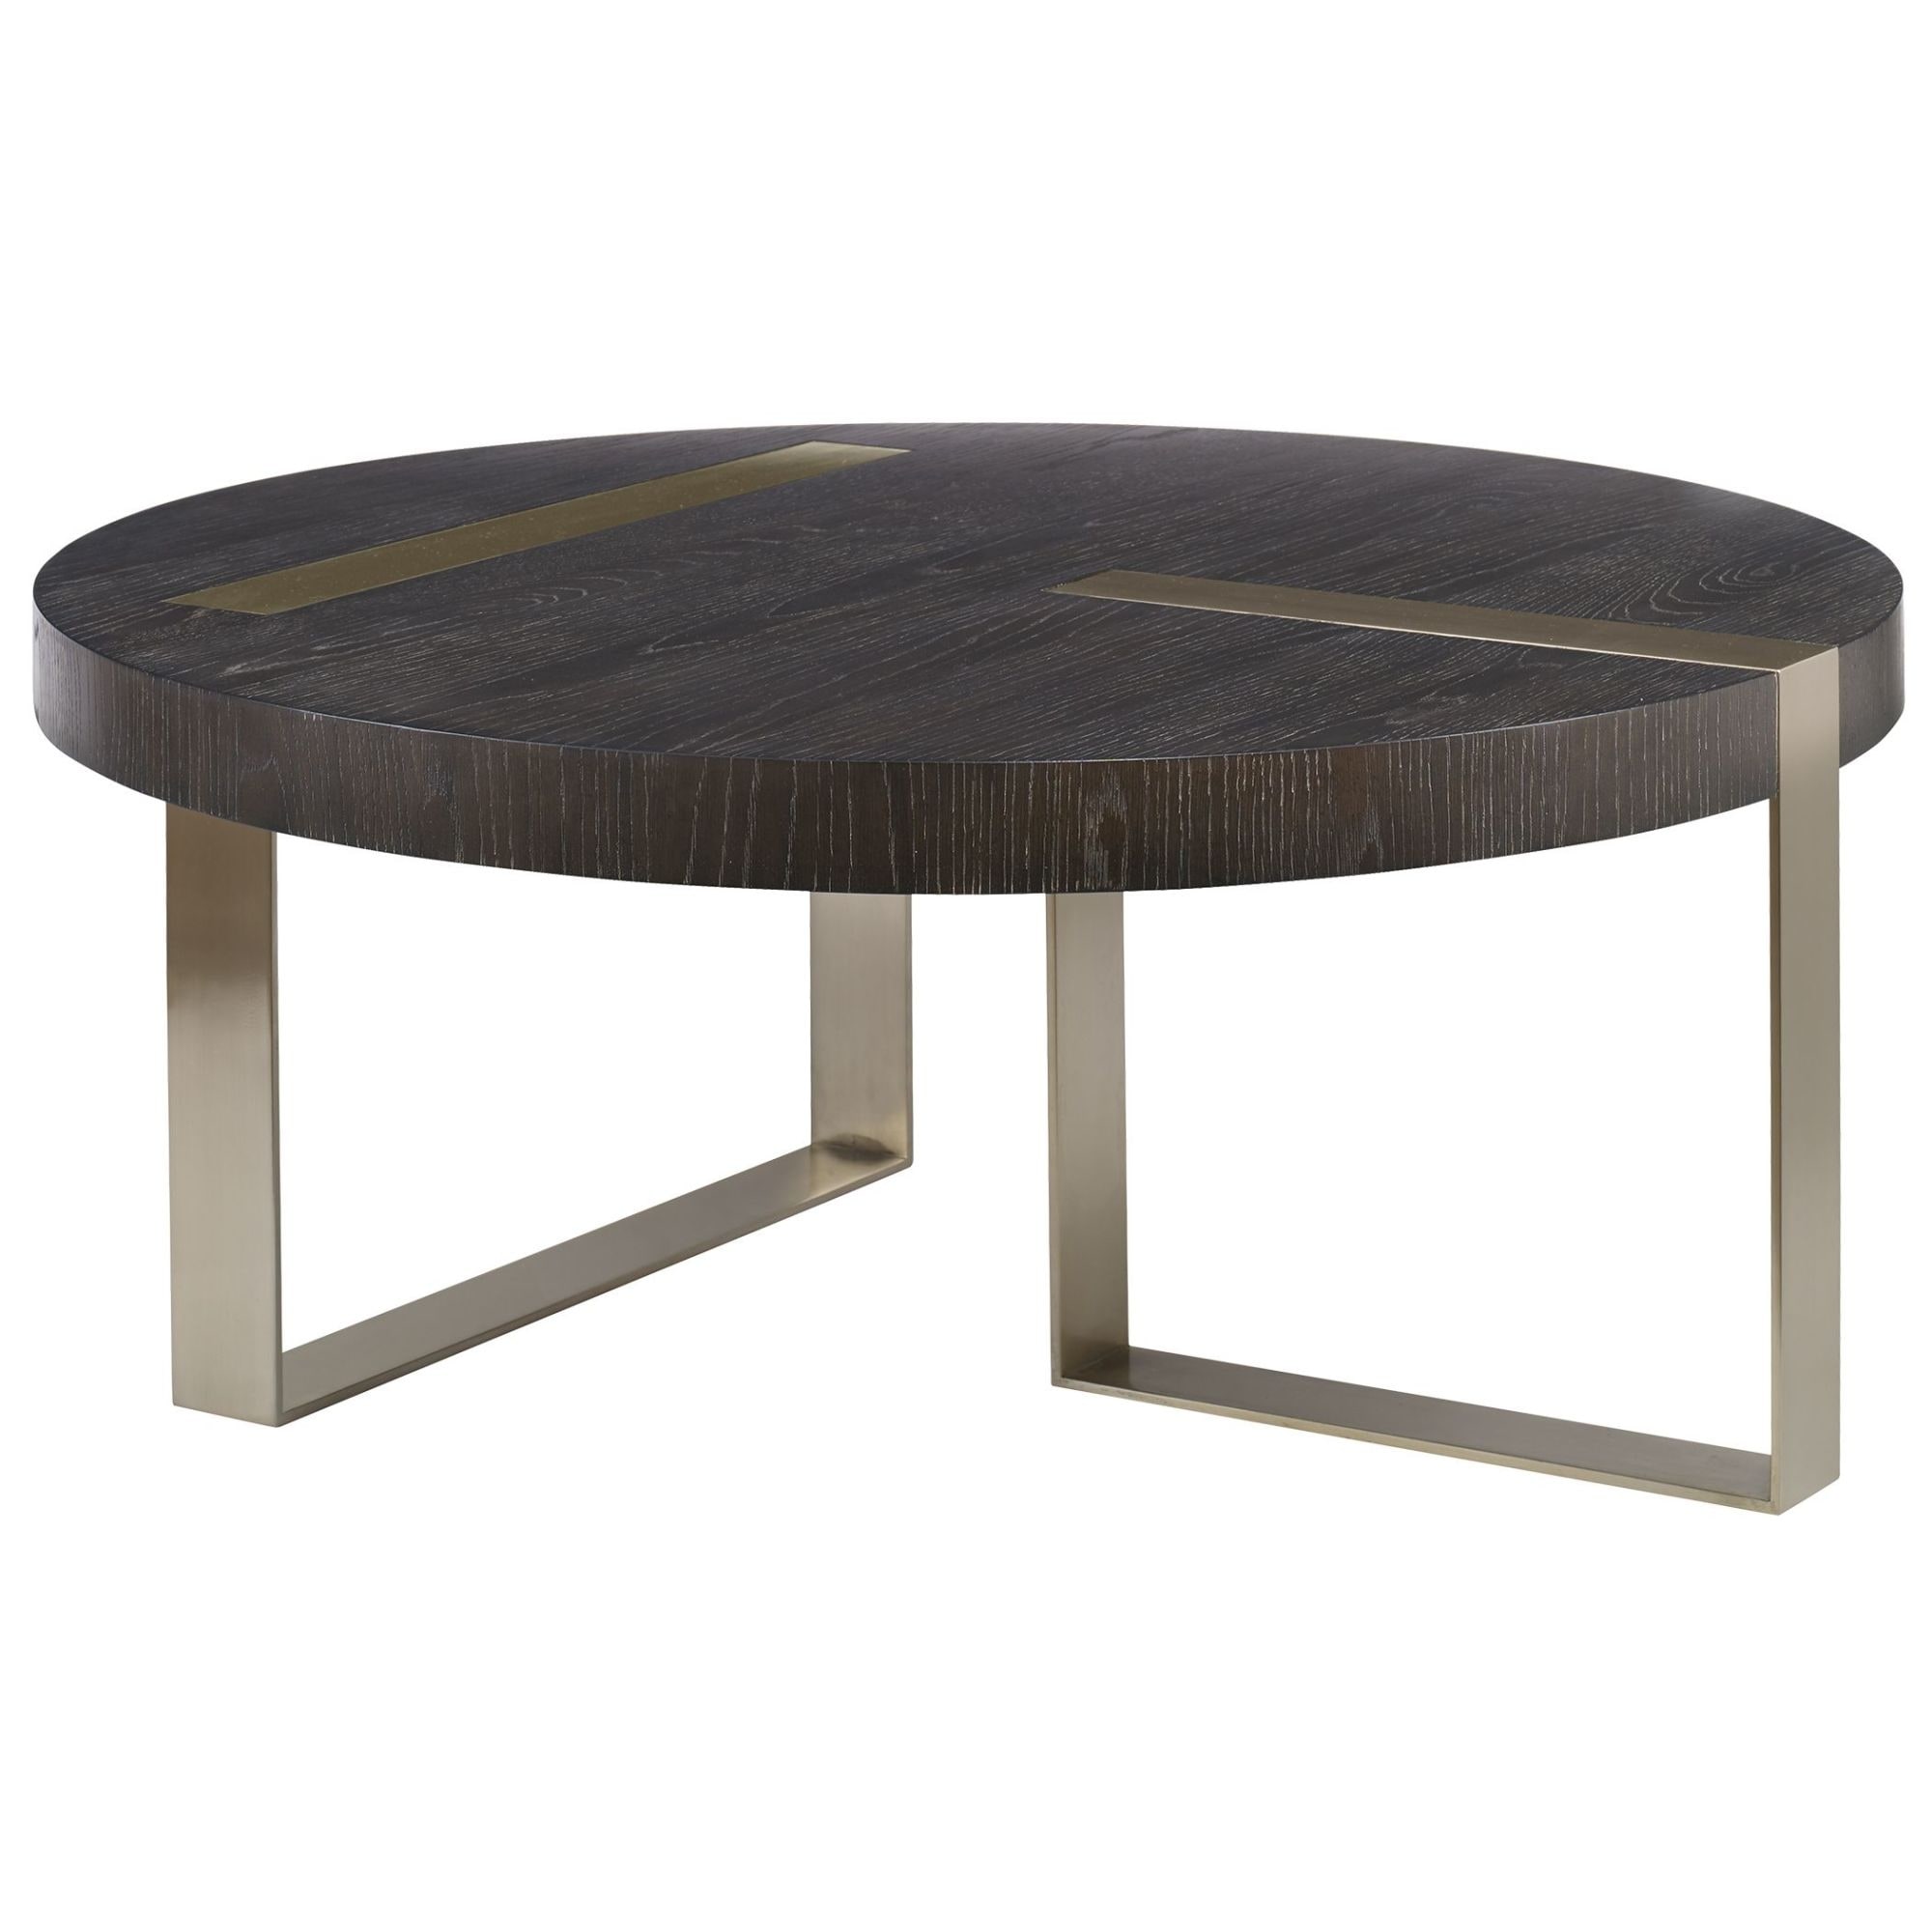 Uttermost Converge 42 inch Round Industrial Modern Coffee Table